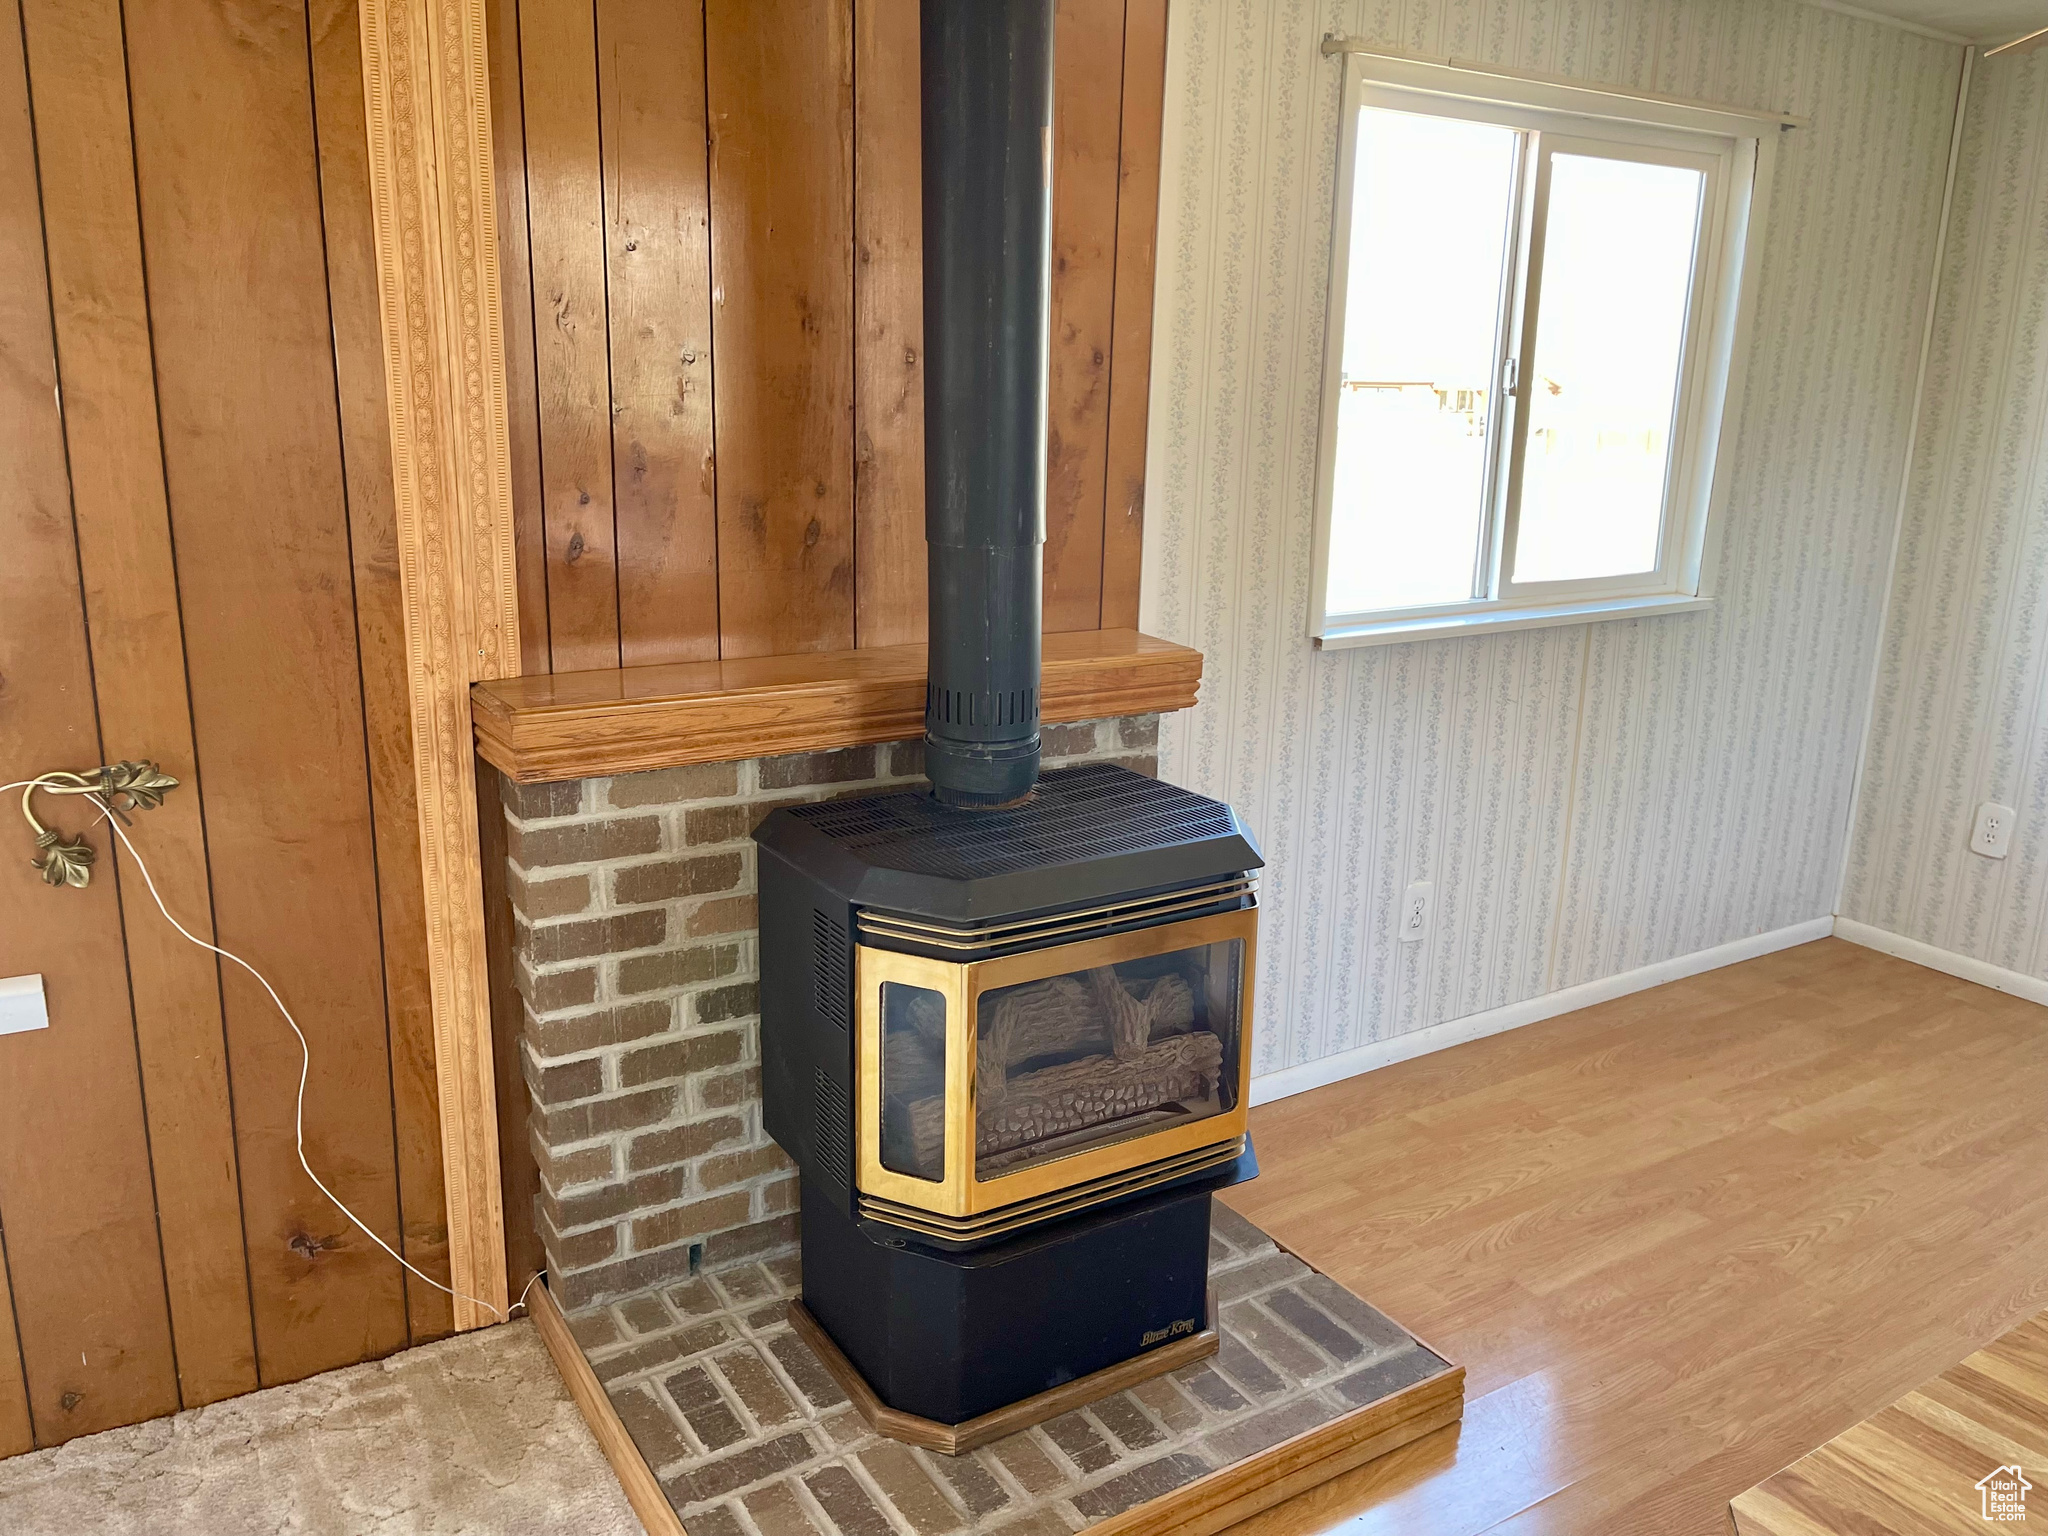 Details featuring a wood stove, wood walls, and wood-type flooring